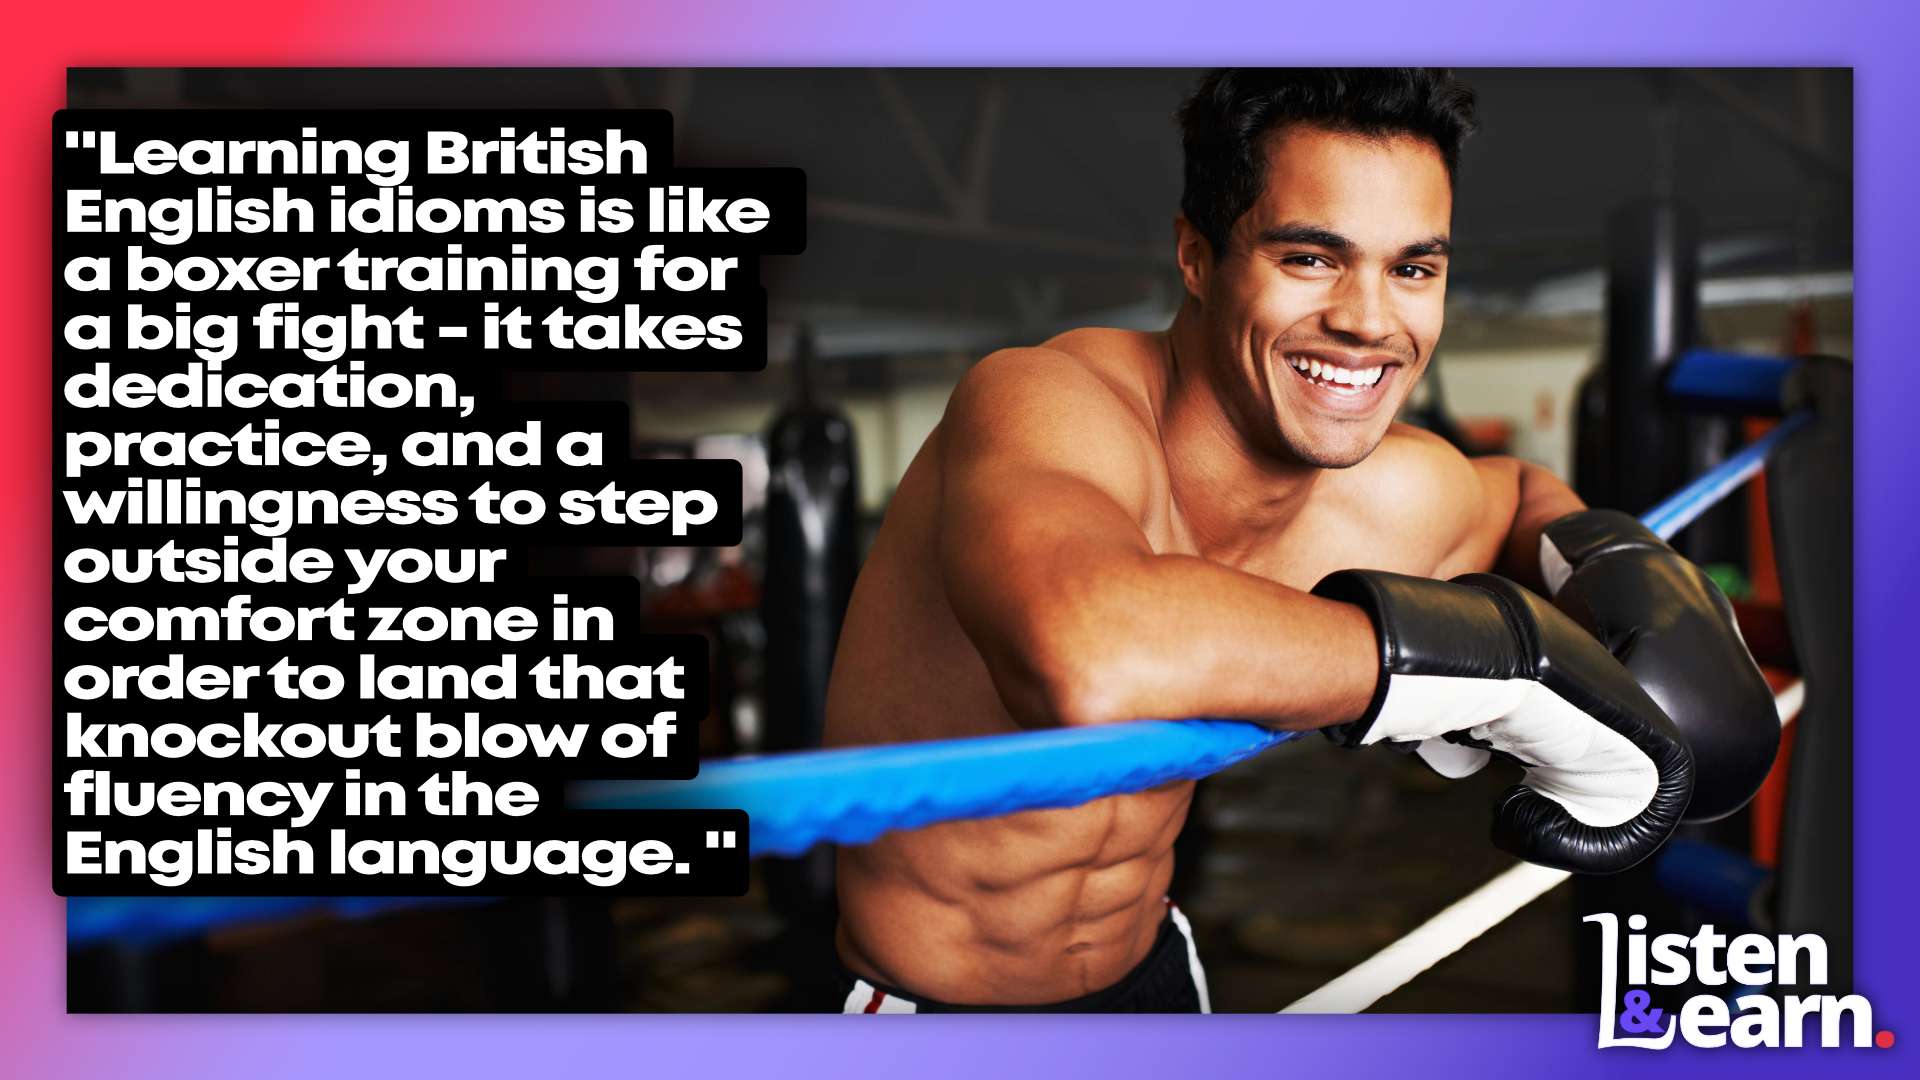 A smiling boxer learning against the ropes of a boxing ring. Join us and subscribe to our Learn English Through Listening podcast today to elevate your fluency and expand your vocabulary with engaging lessons taught by expert British English teachers.